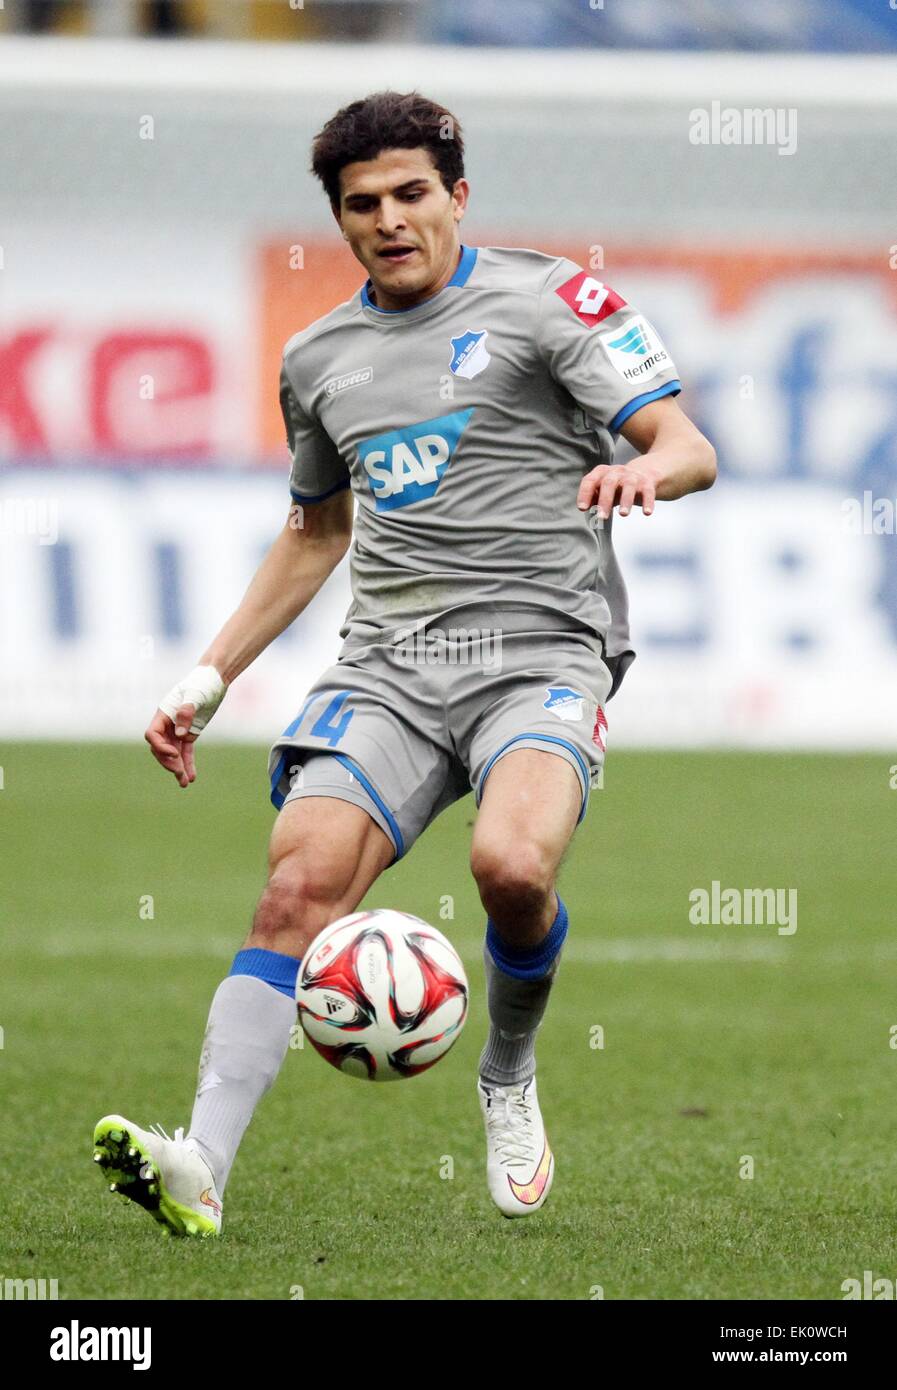 Hoffenheim's Tarik Elyounoussi in action during the German Bundesliga soccer match between SC Paderborn and 1899 Hoffenheim at Benteler Arena in Paderborn, Germany, 21 March 2015. PHOTO: OLIVER KRATO/dpa Stock Photo